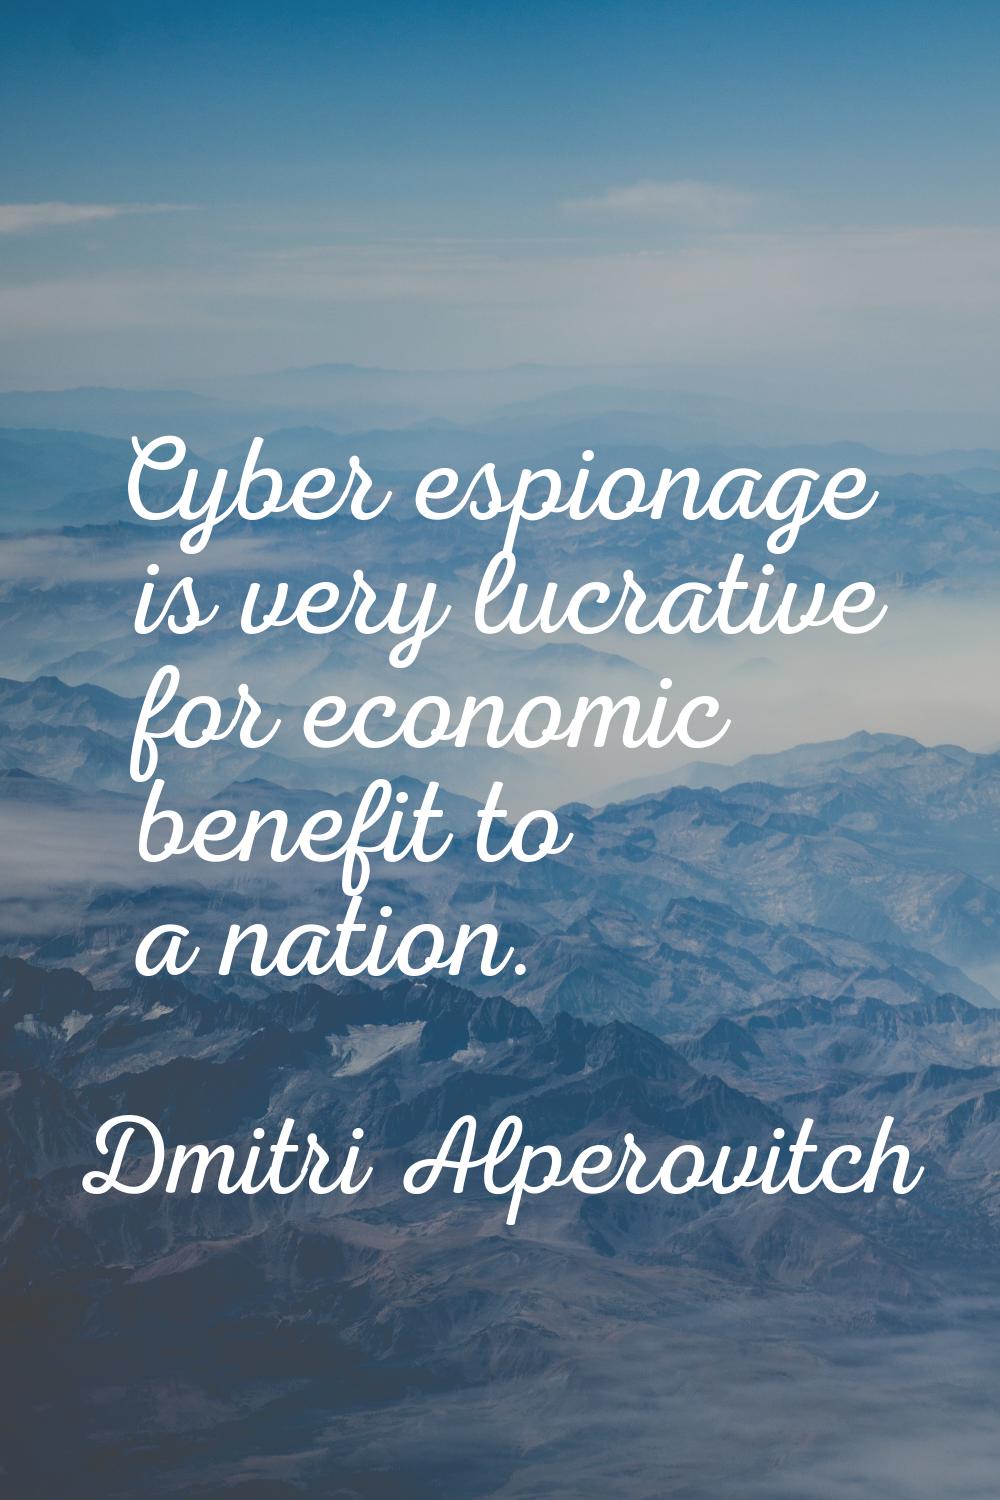 Cyber espionage is very lucrative for economic benefit to a nation.